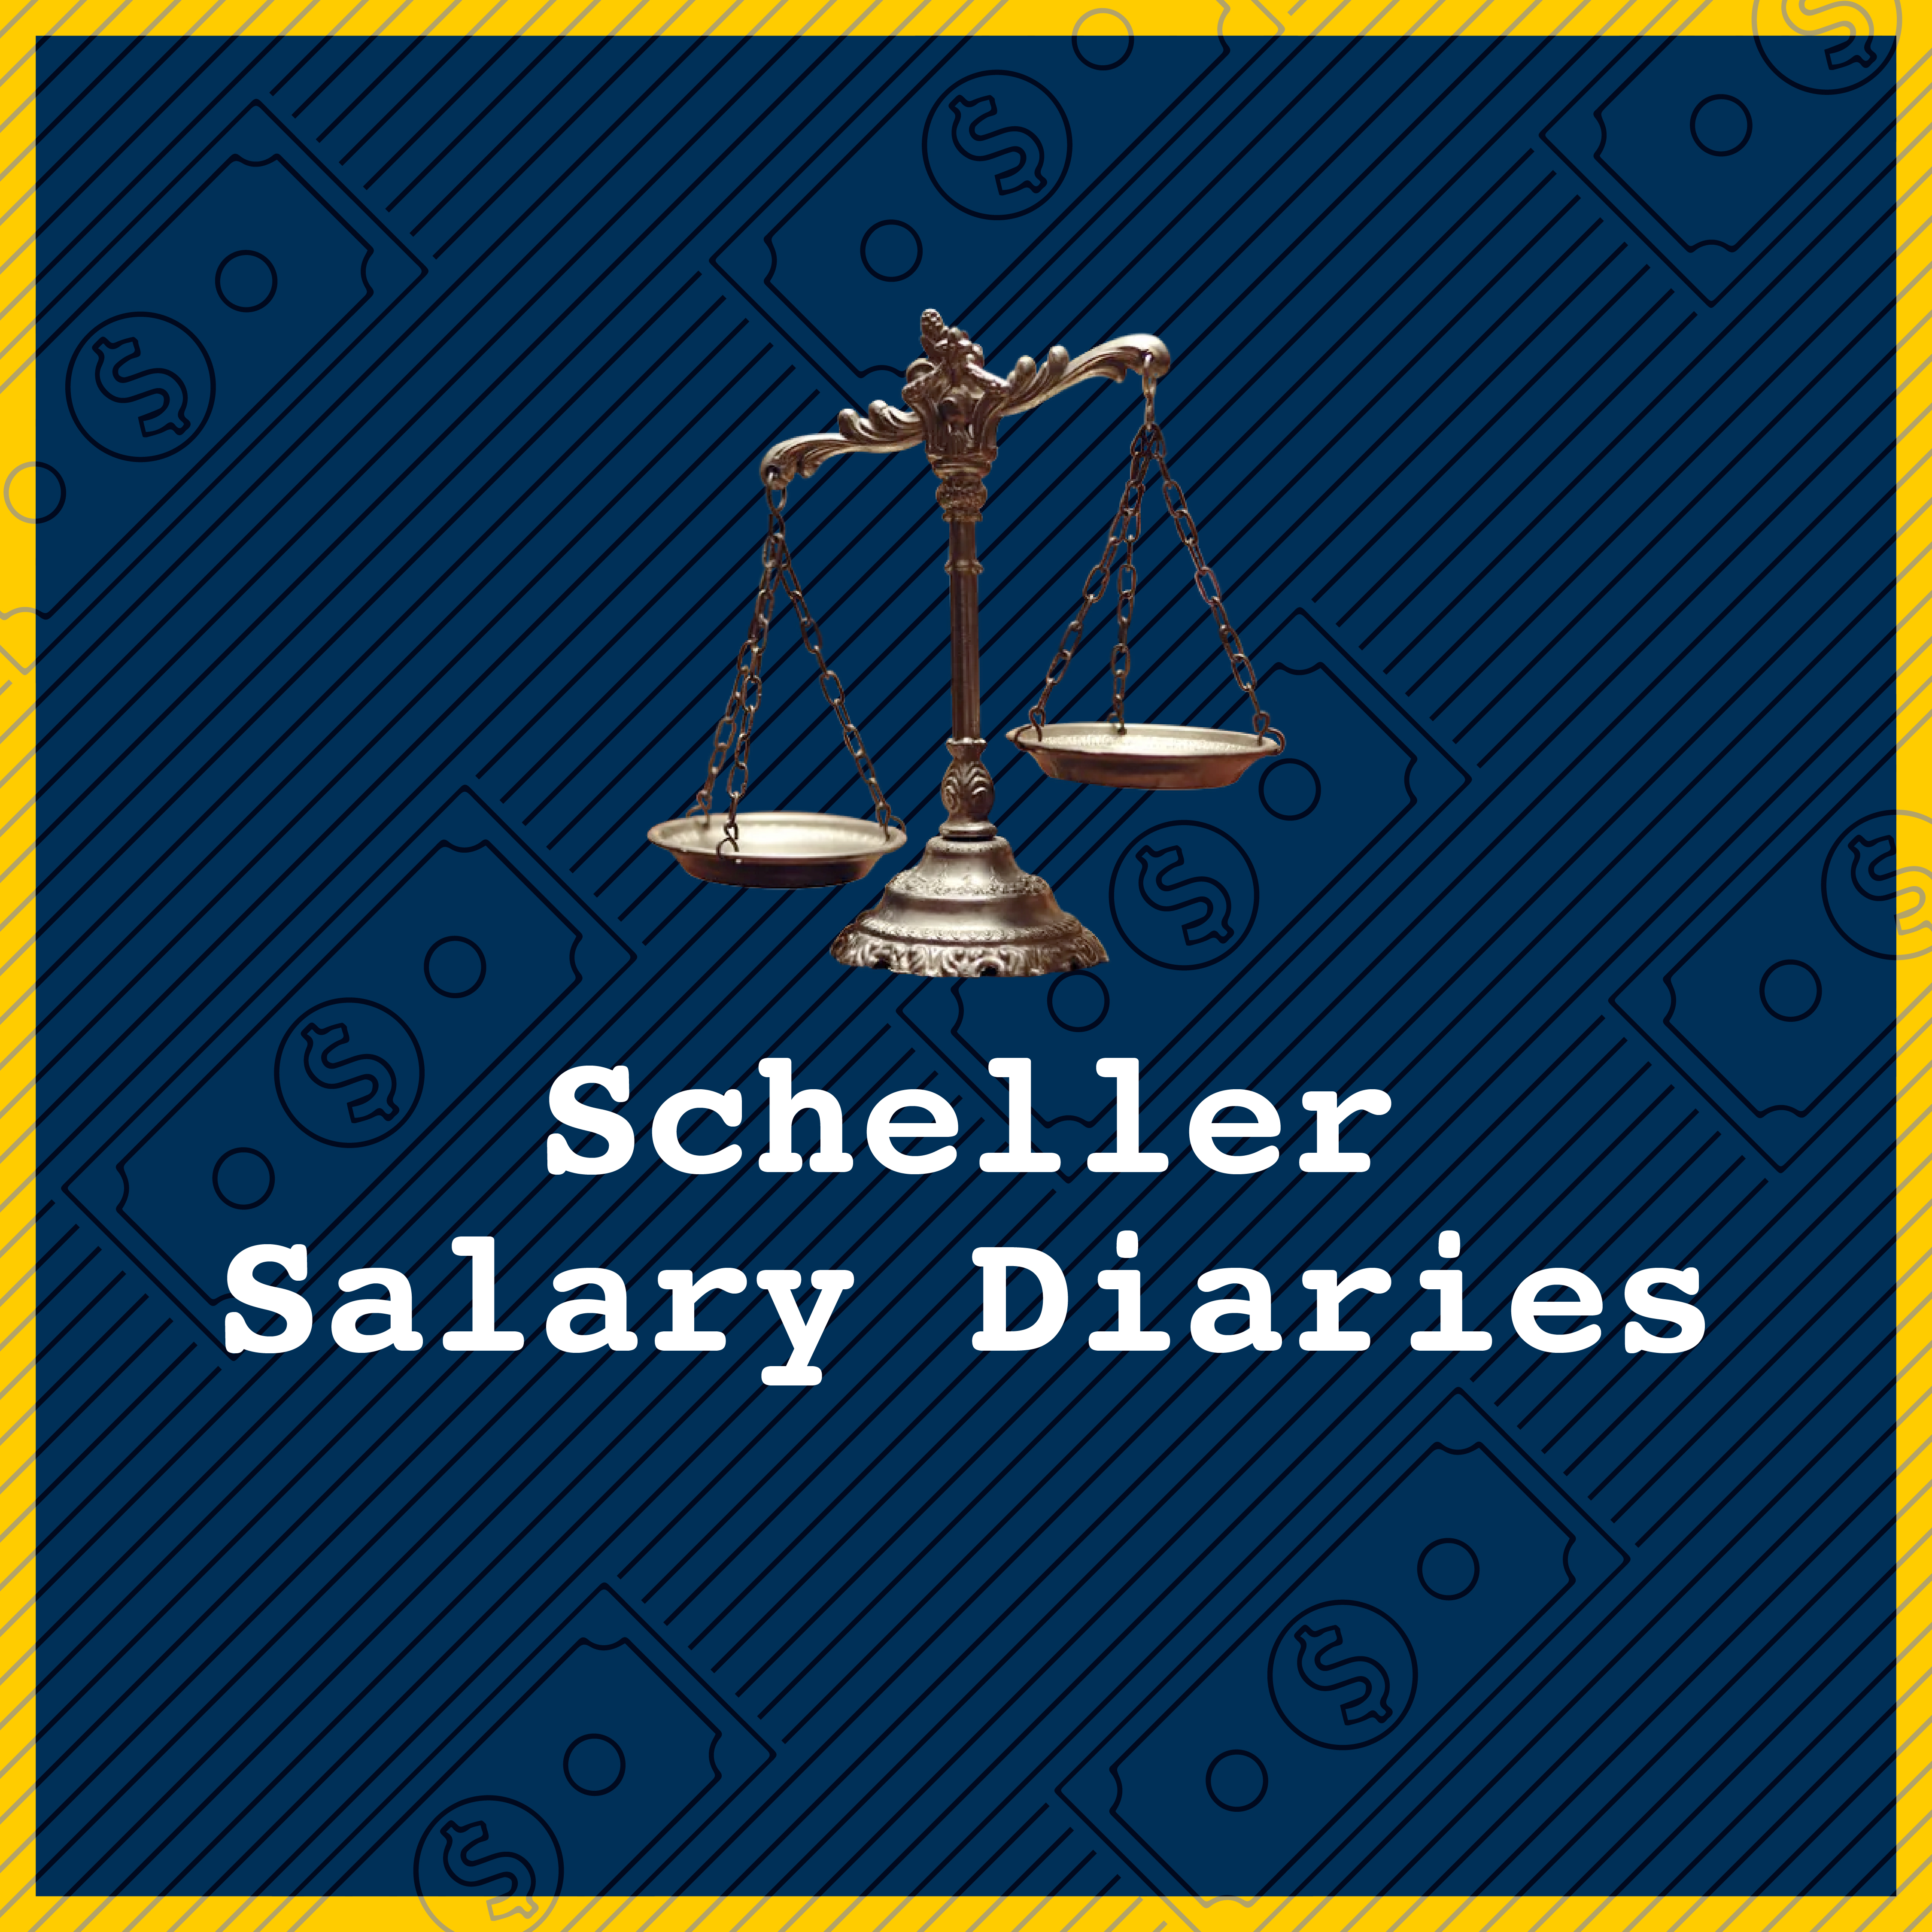 Scheller Salary Diaries with a tilted scale representing the legal system.